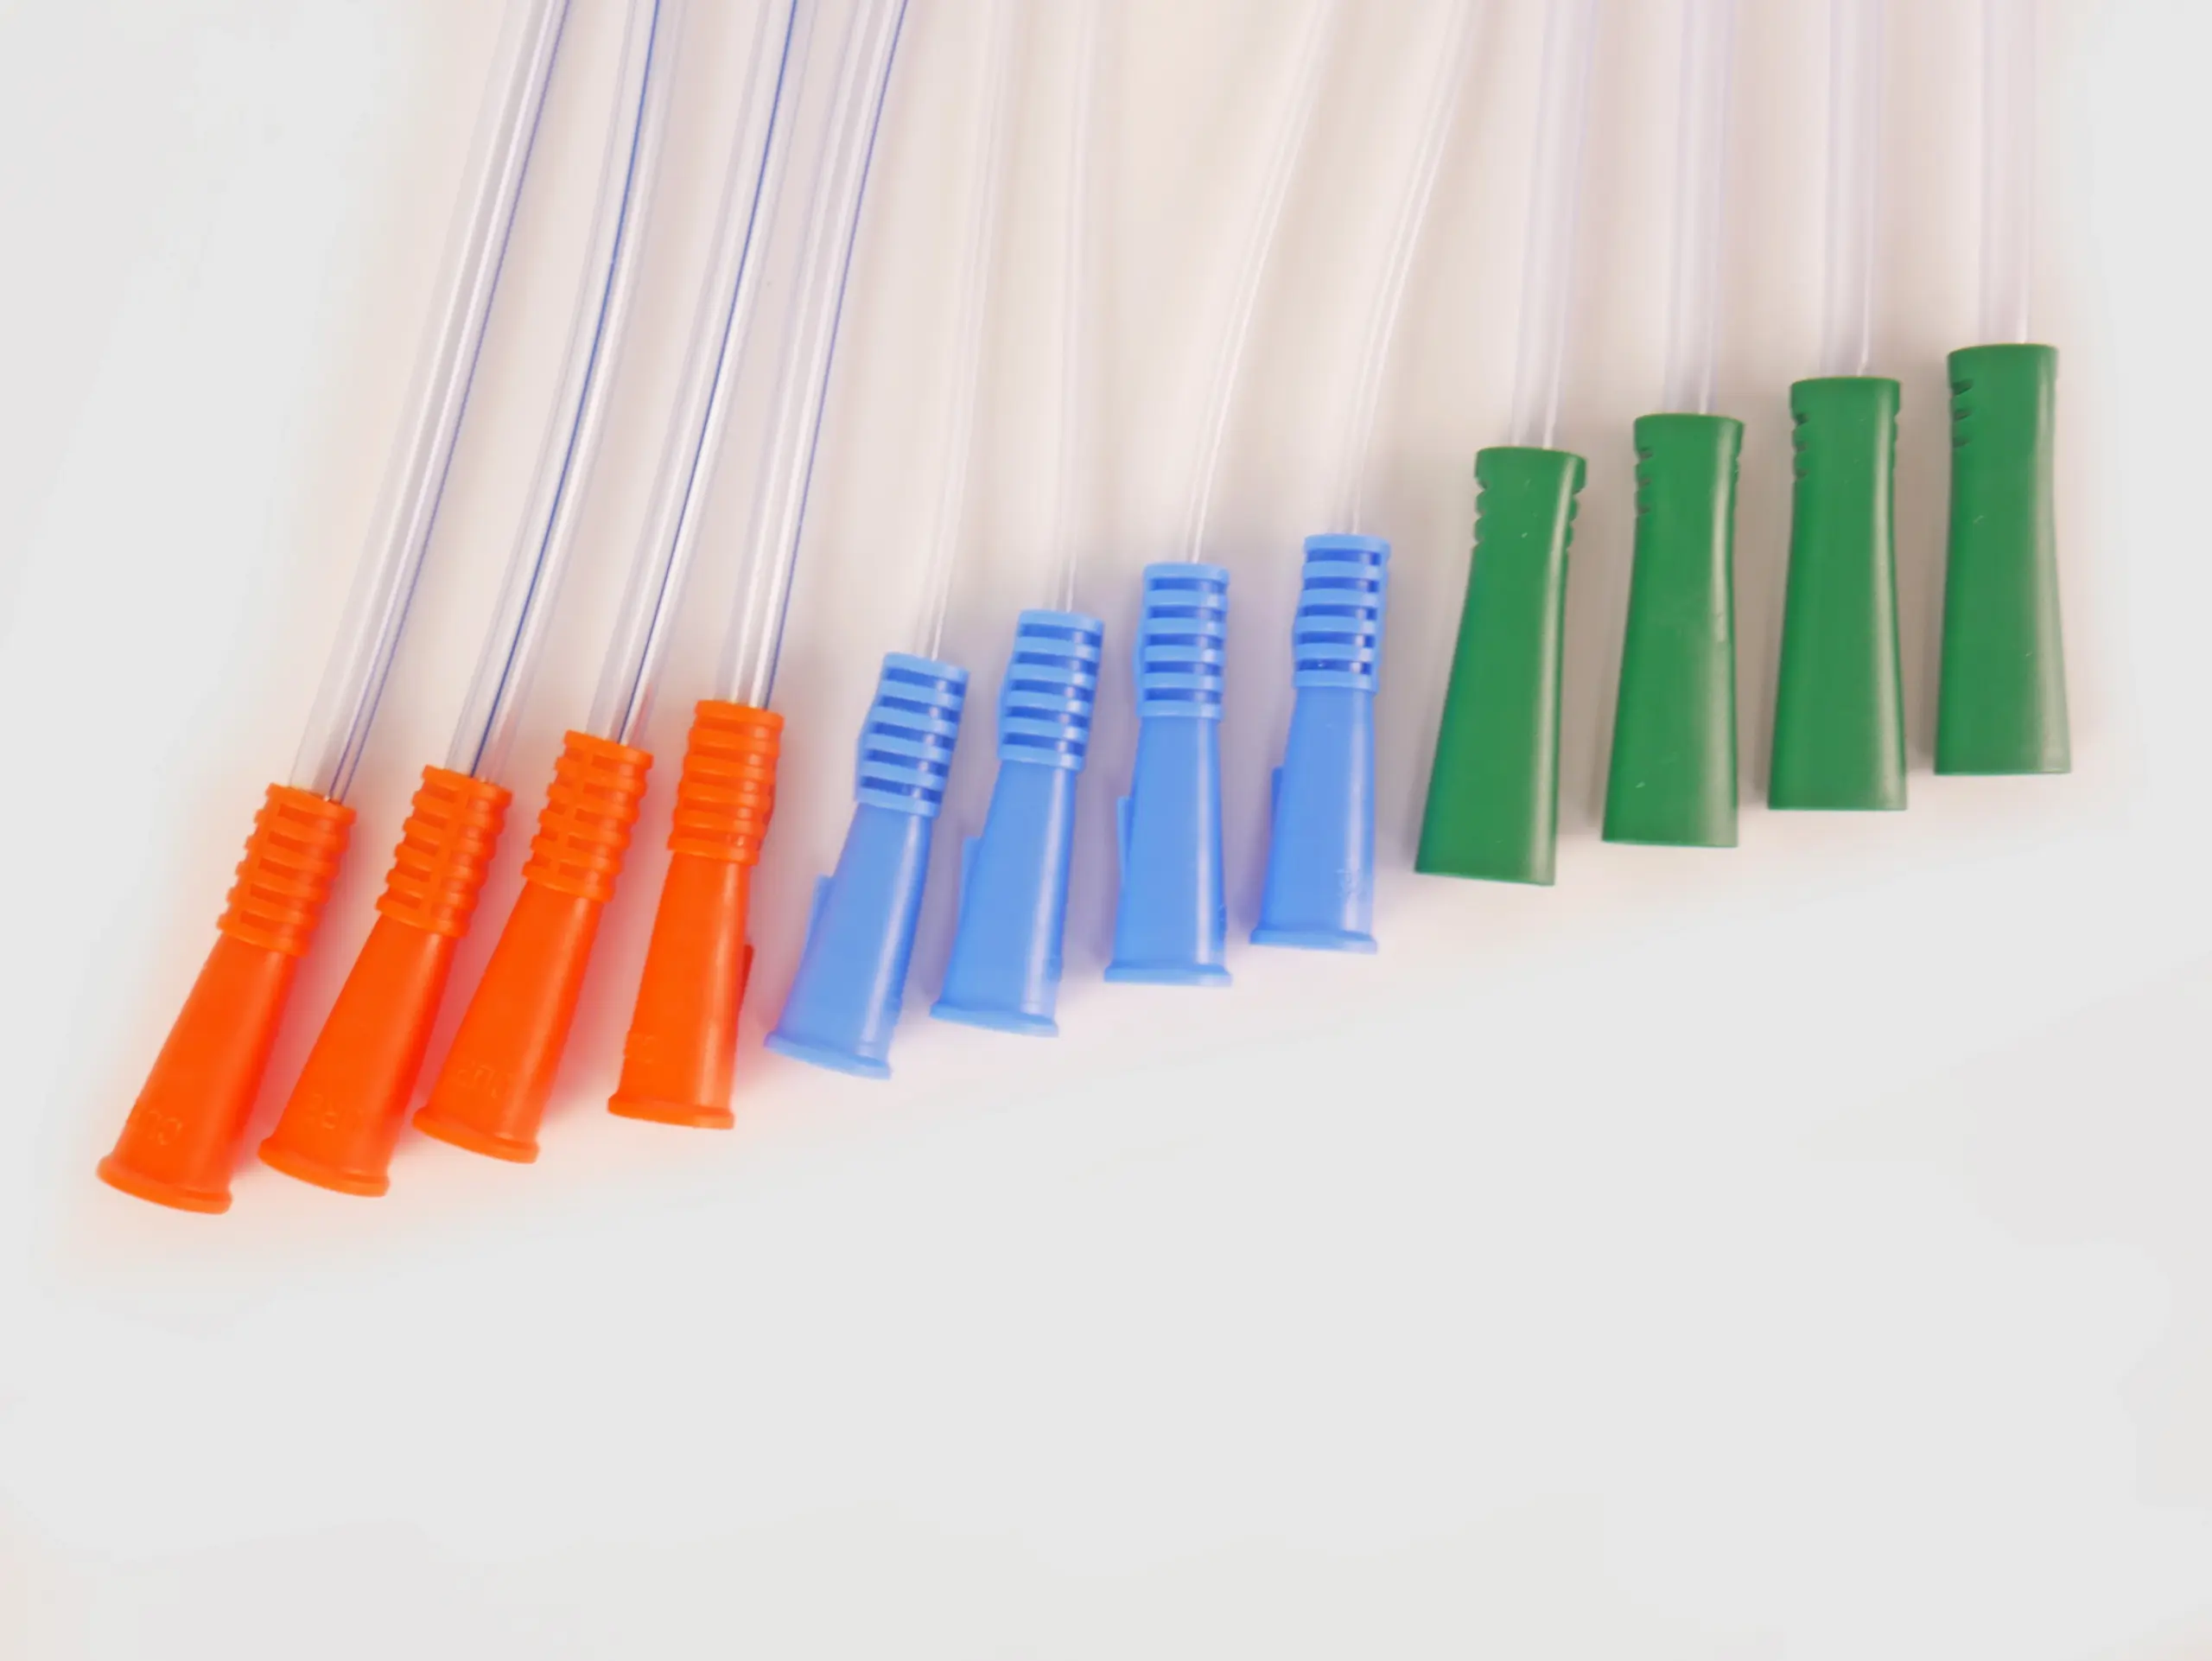 Photograph of an assortment of twelve RA Fischer Co. catheters of deferring lengths and gripper sleeve colors. The catheters are lined up. Gripper colors are blue green orange. White background